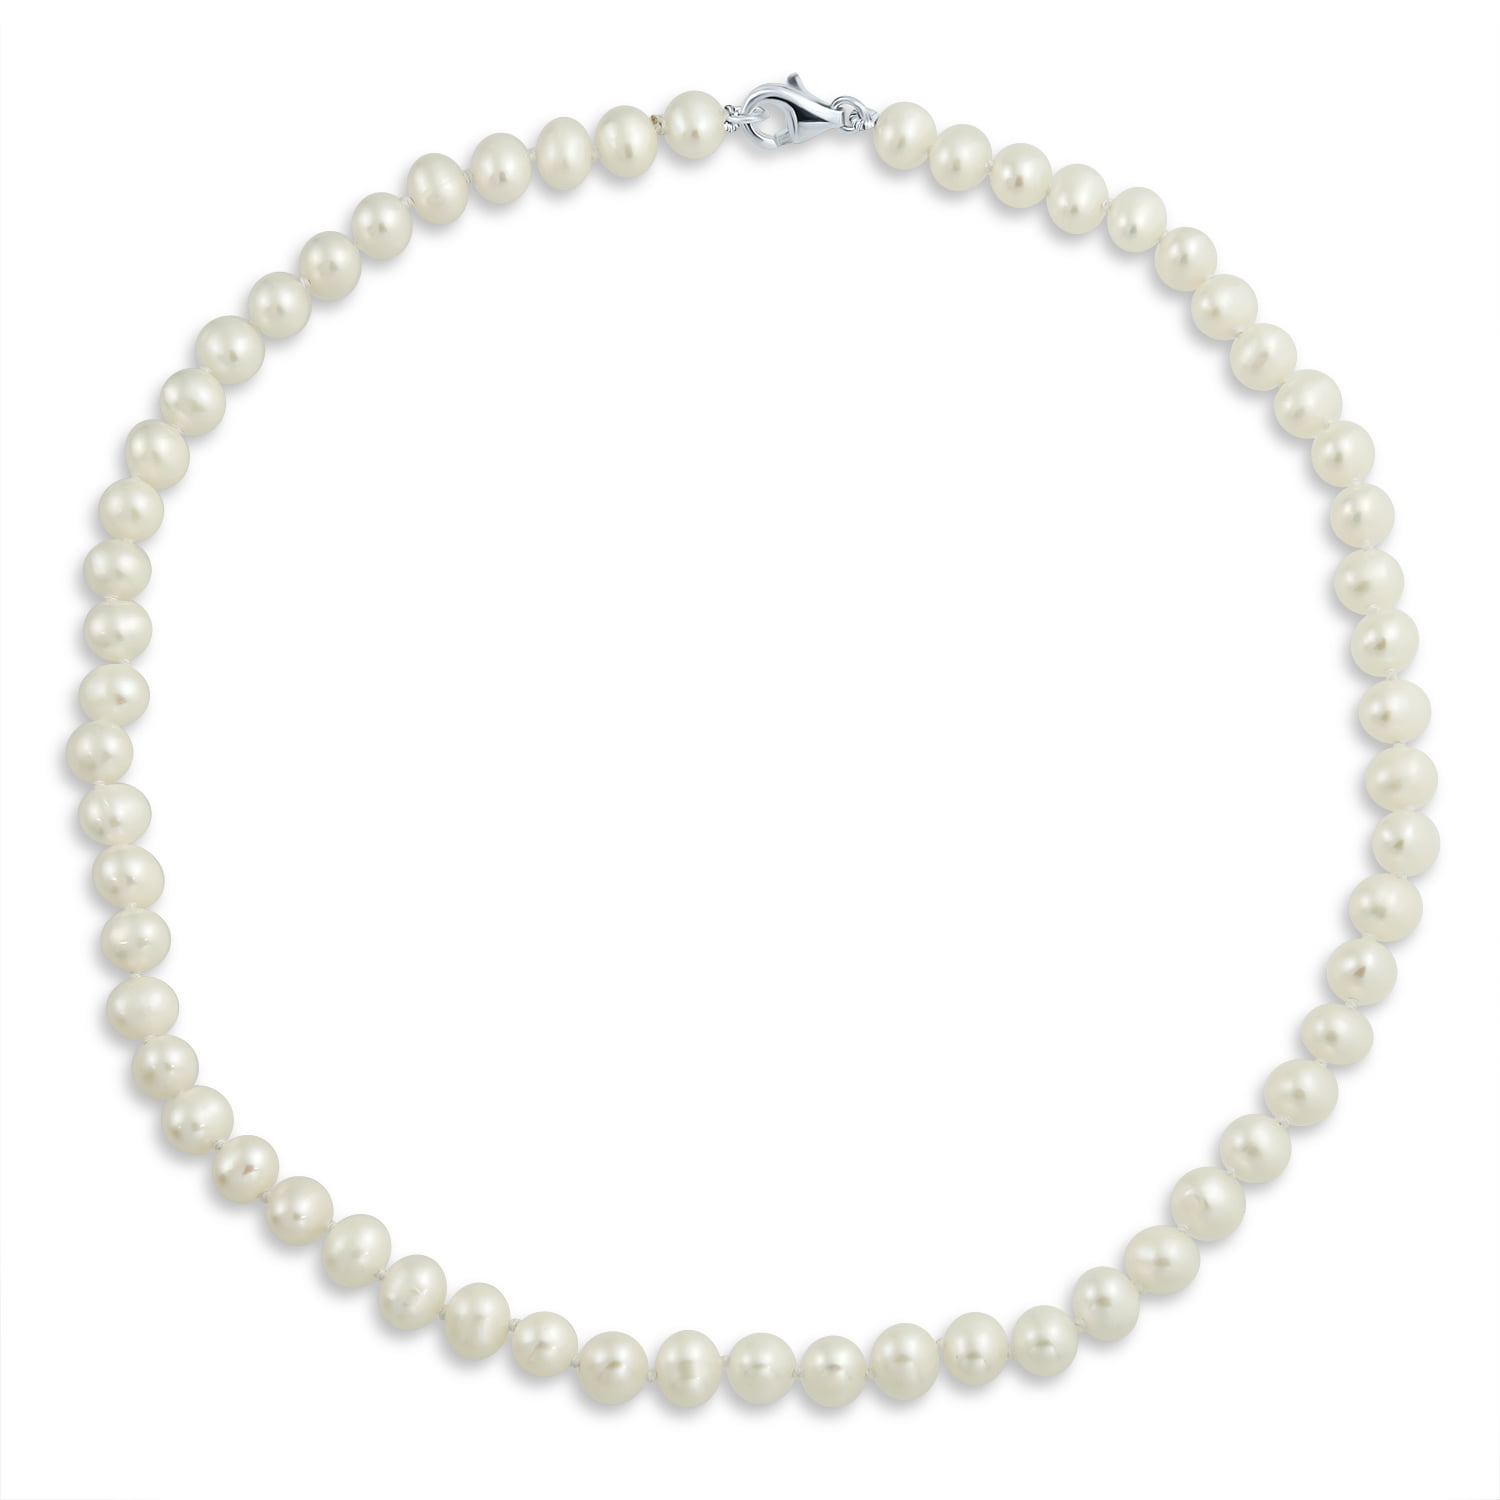 Necklace 17 Inches Long PriceRock Sterling Silver 7-8mm Freshwater Cultured Pearl w/2in ext